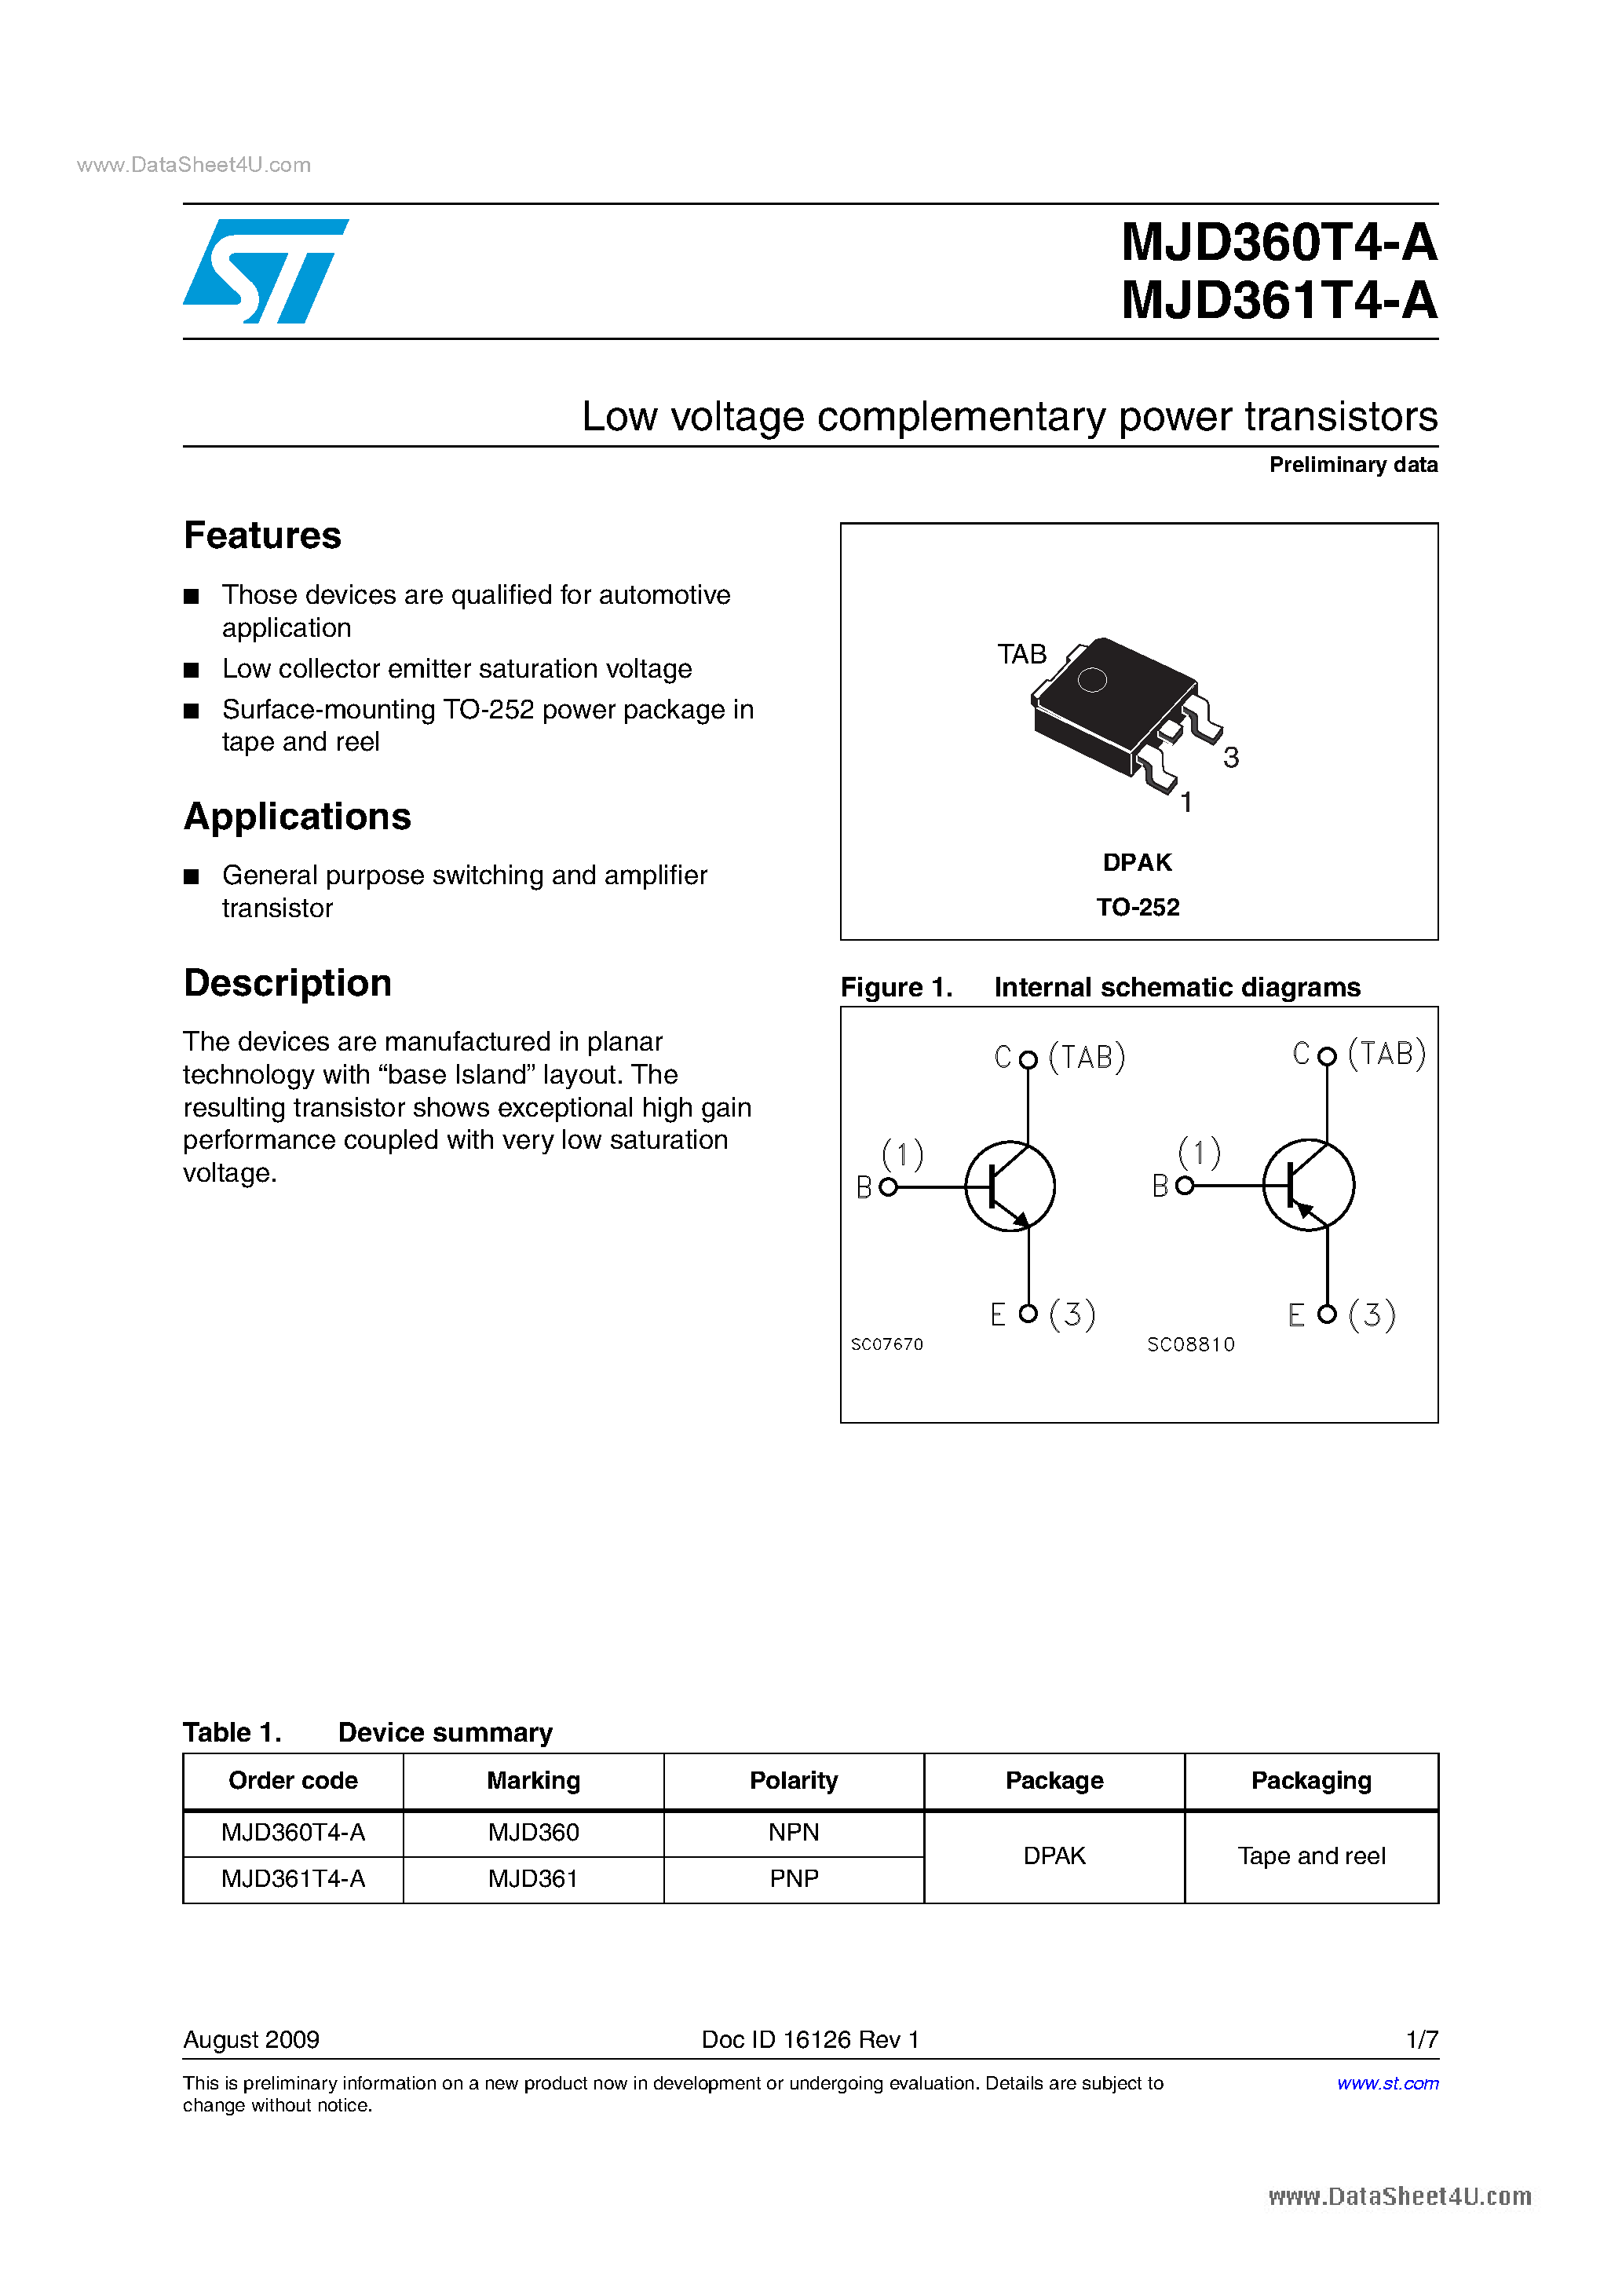 Даташит MJD360T4-A - (MJD360T4-A / MJD361T4-A) Low Voltage Complementary Power Transistors страница 1